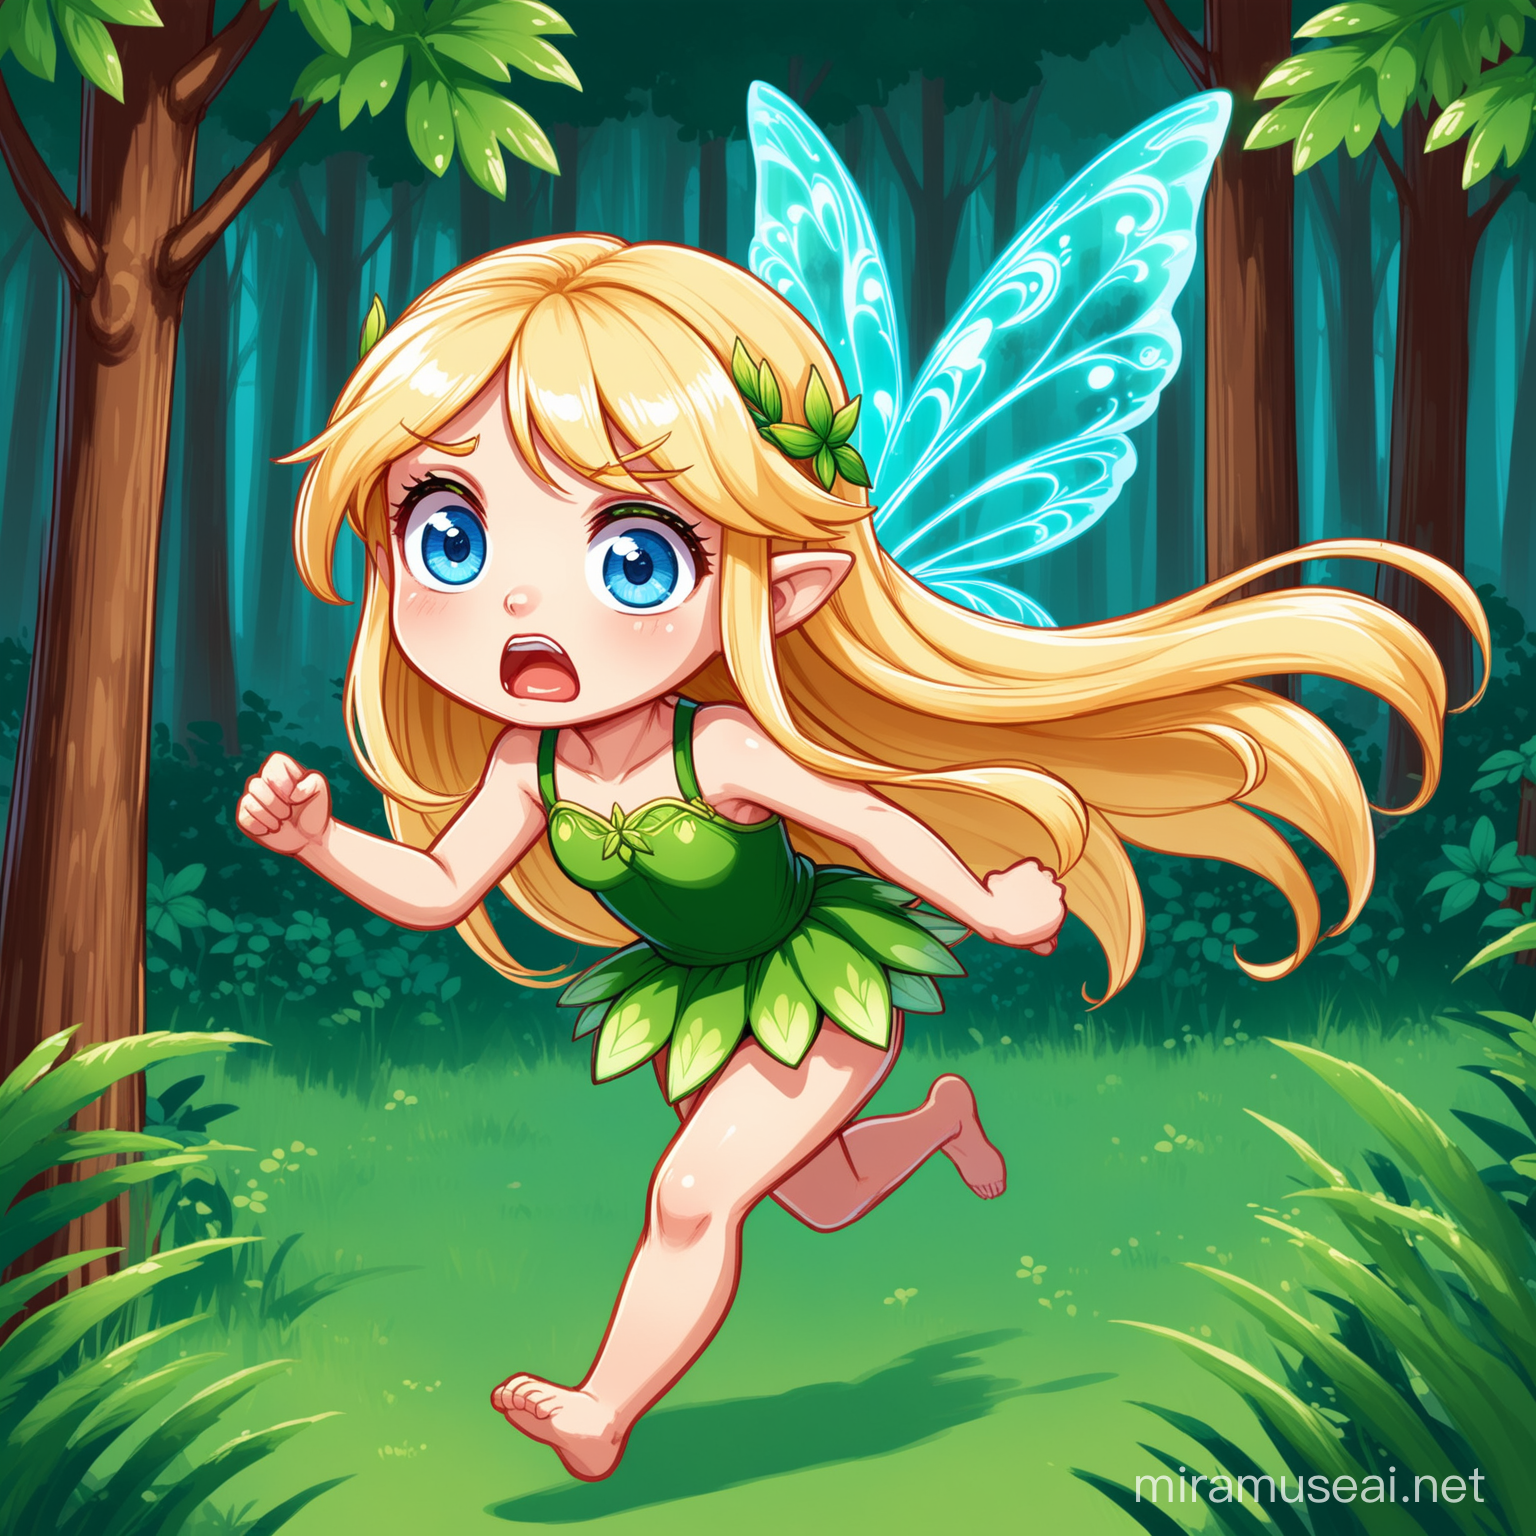 Cartoon Forest Fairy with Blonde Hair and Blue Eyes Running